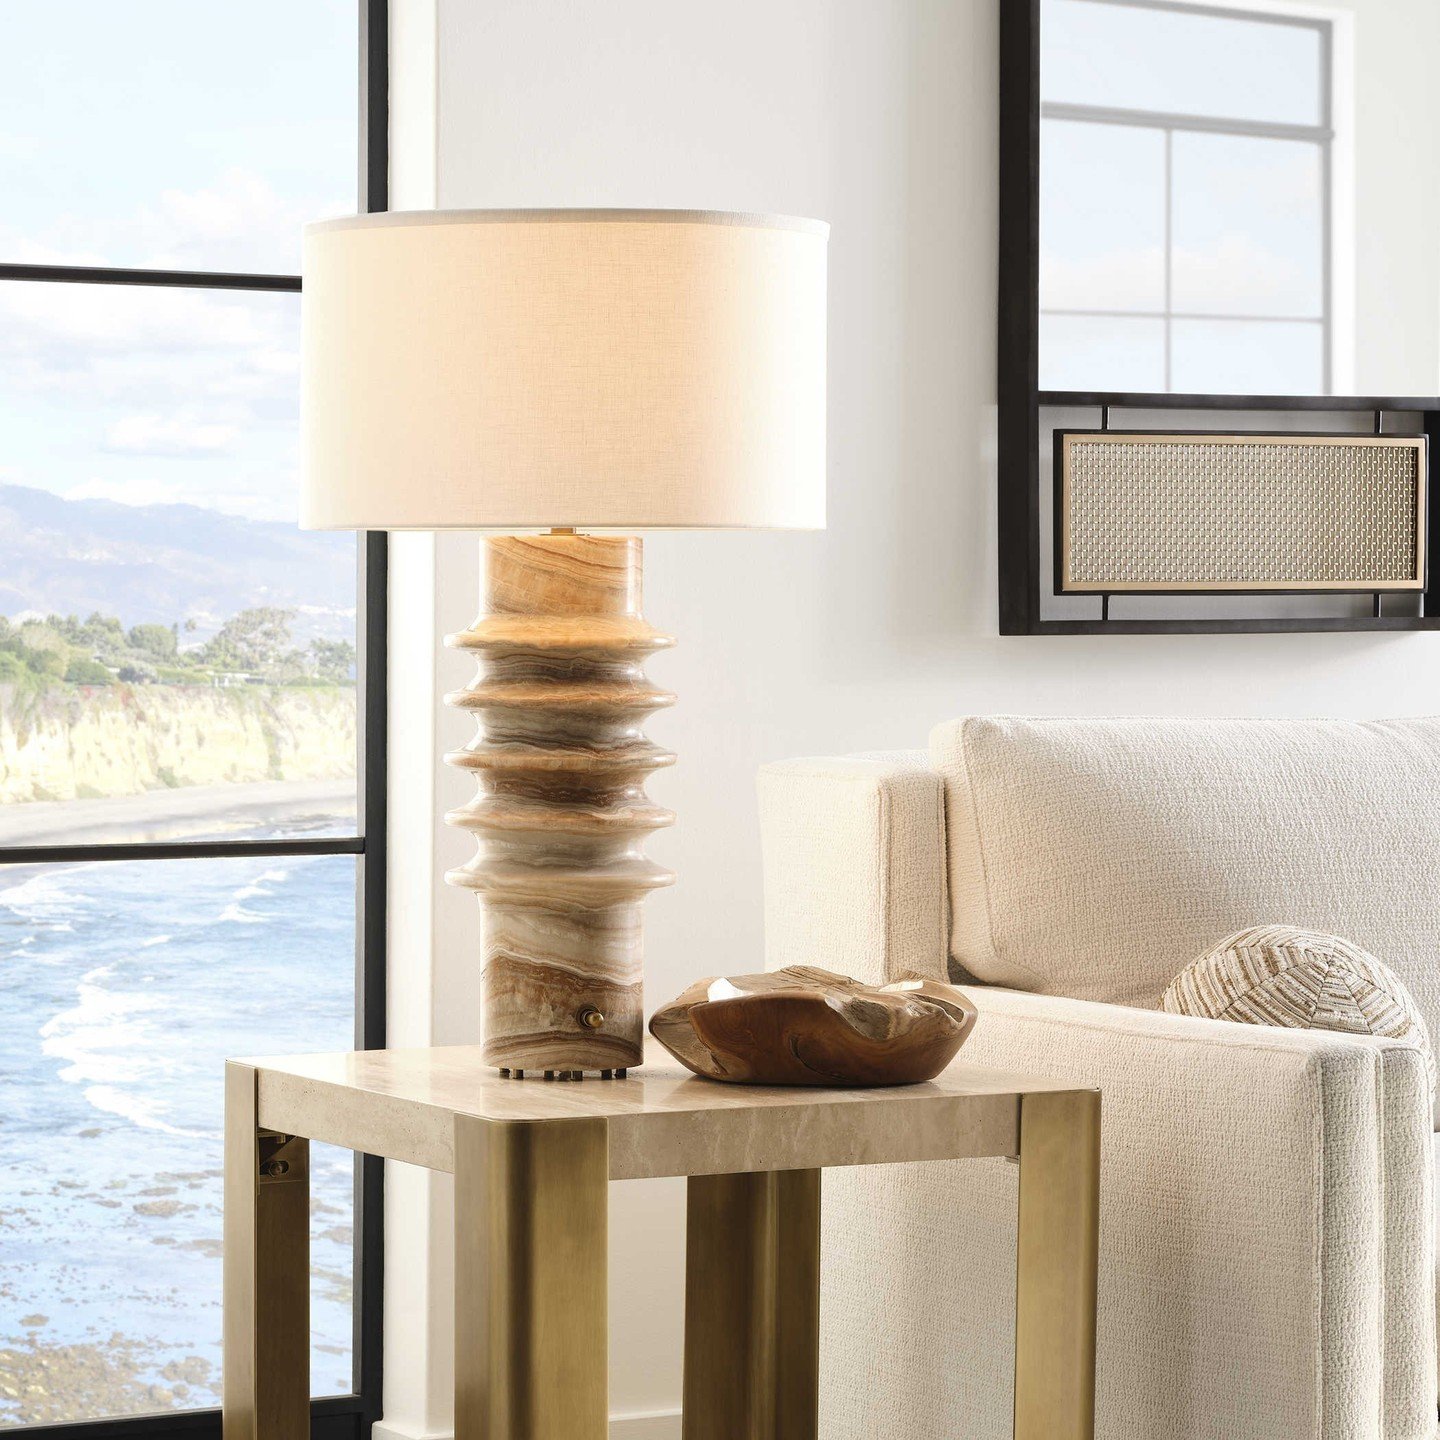 Statement lighting doesn't have to hang from the ceiling! This luxurious gold, gray and cream onyx, lamp has a tailored shade with an integrated diffuser on top. The single socket light has a rotary dimmer in the base that adjusts light to provide ge